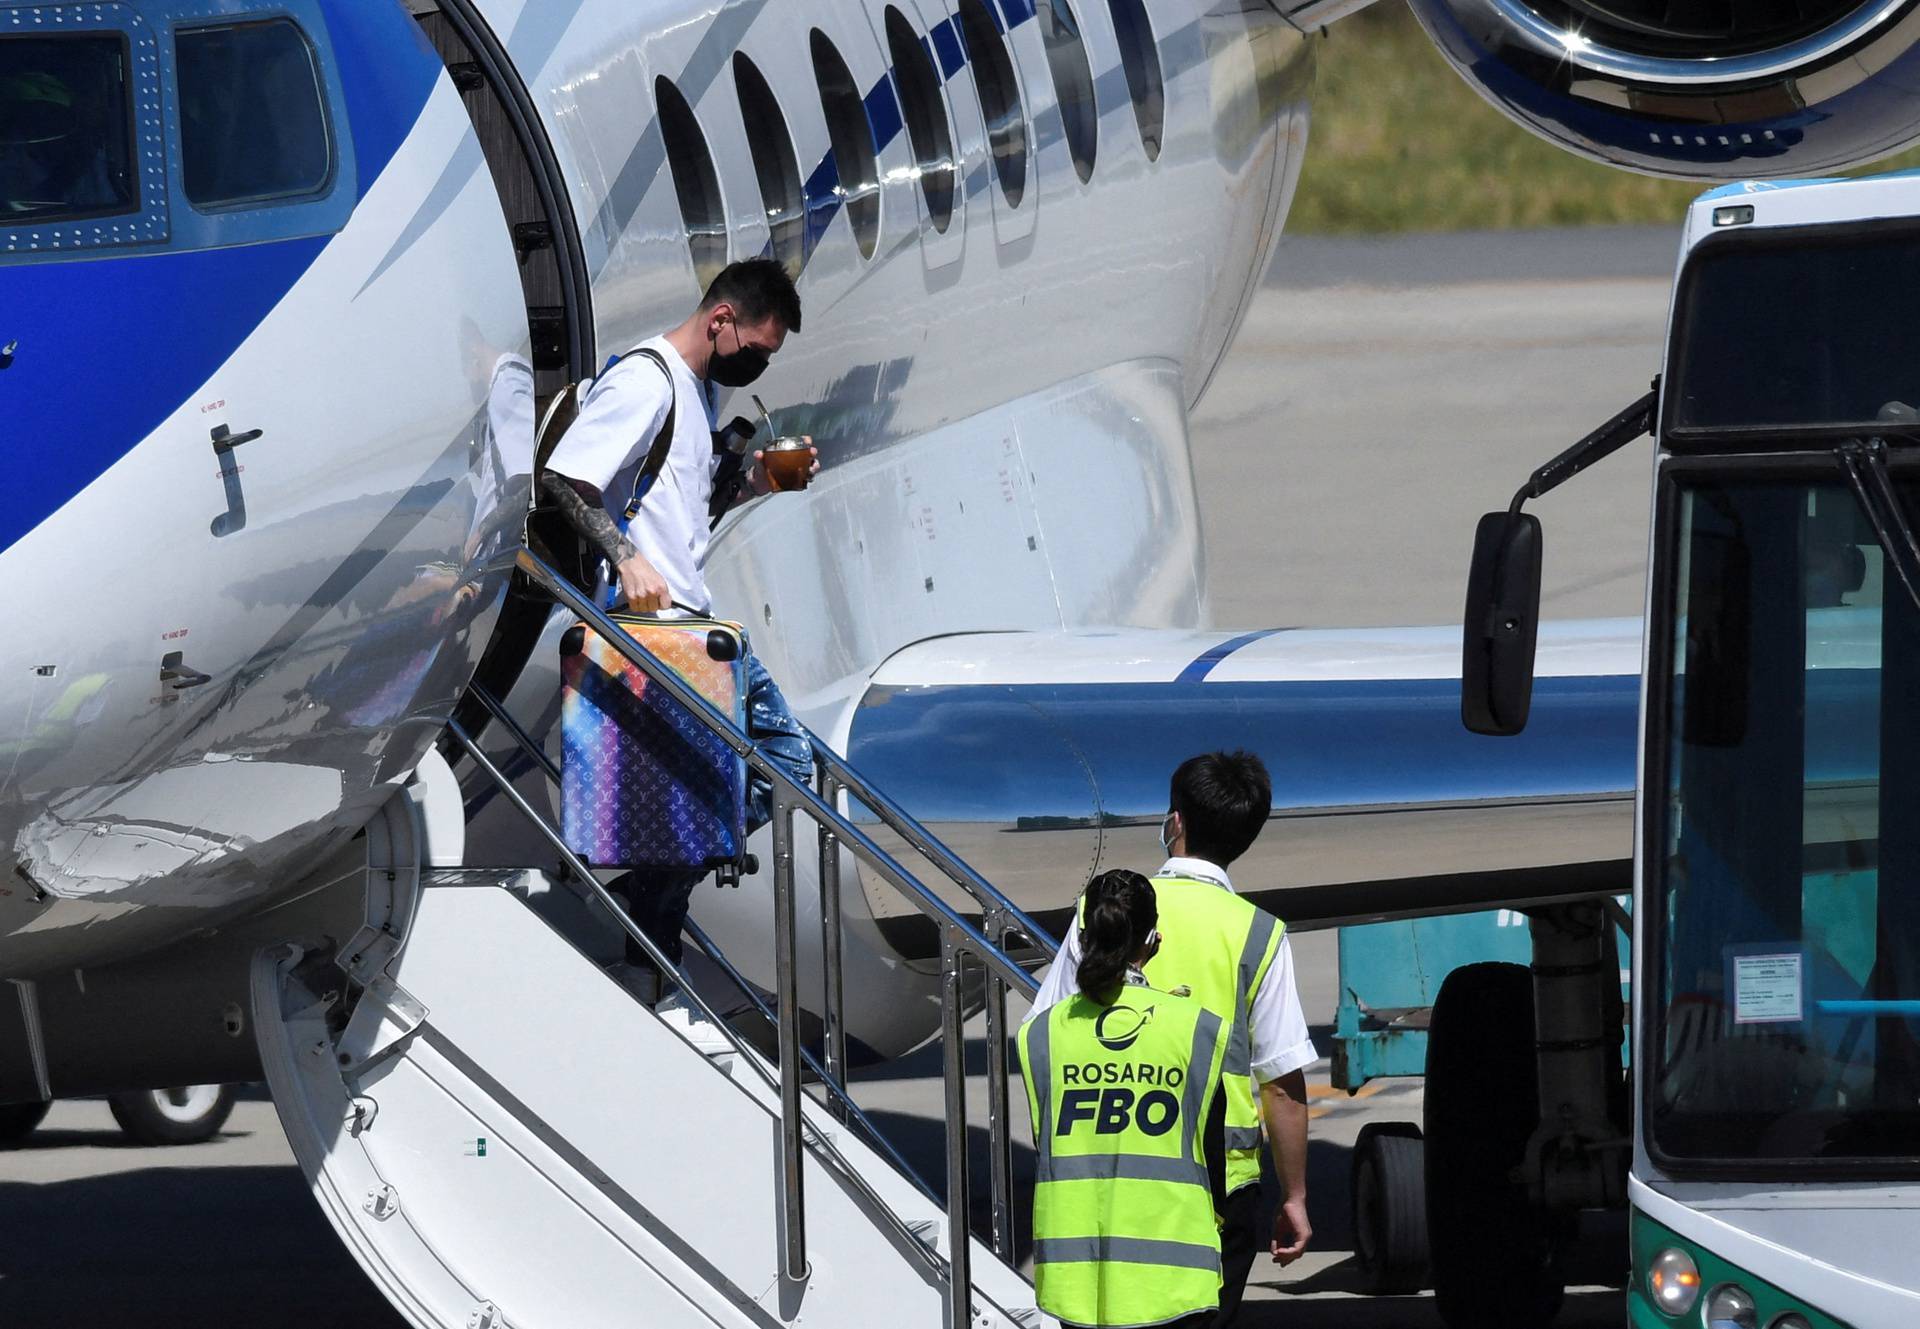 Argentine footballer Lionel Messi gets down from a plane on arrival at the Islas Malvinas airport, in Rosario